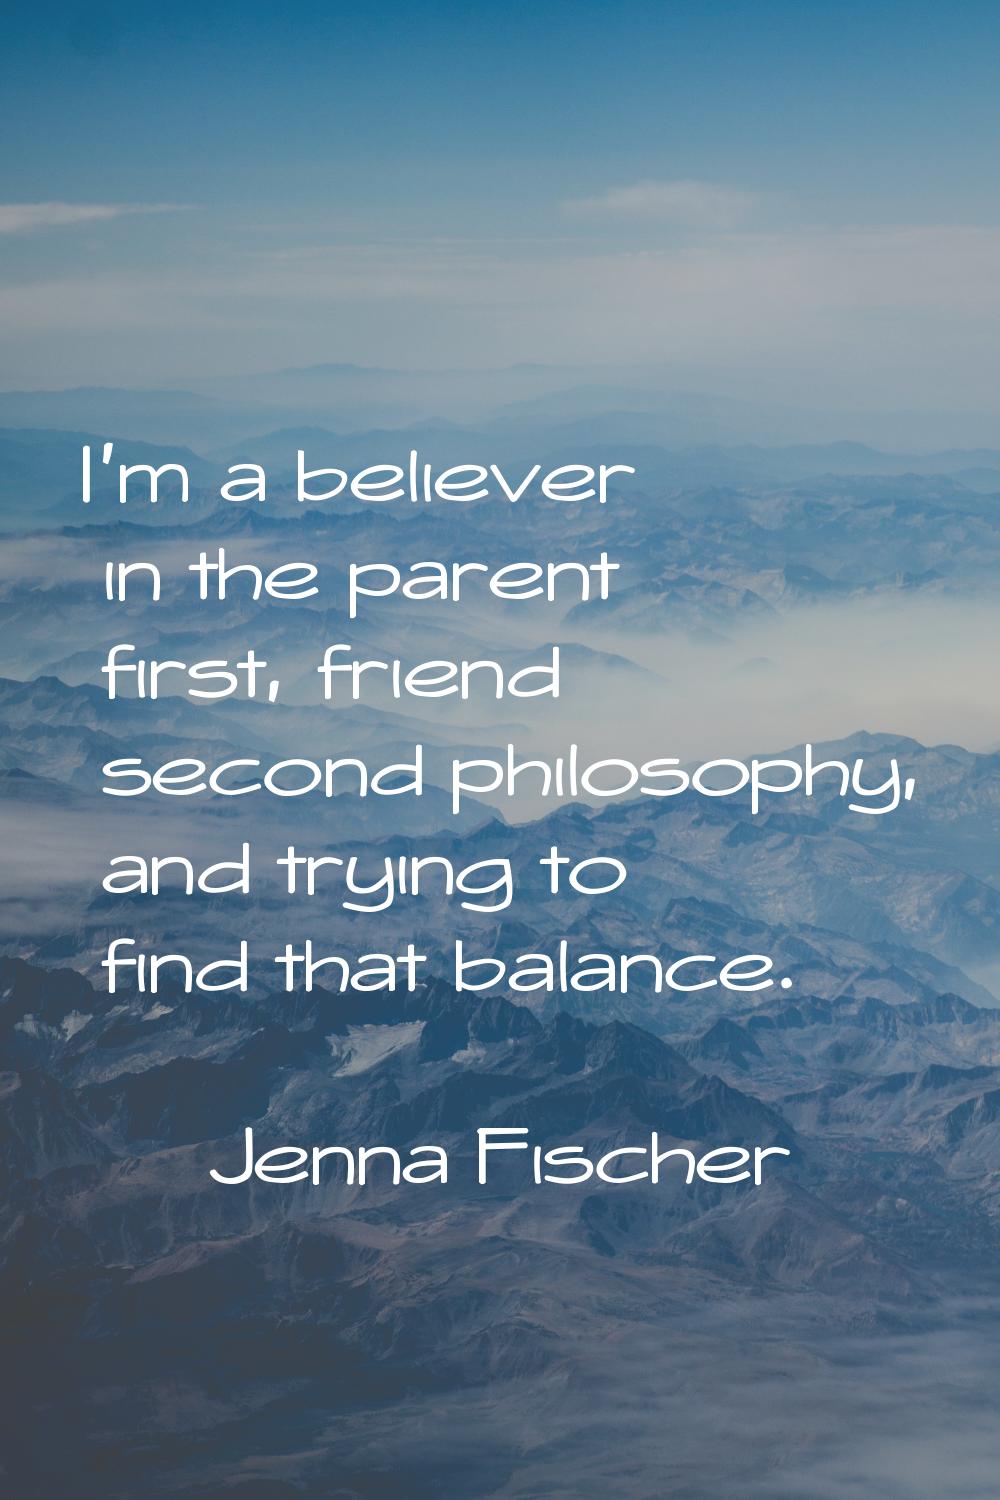 I'm a believer in the parent first, friend second philosophy, and trying to find that balance.